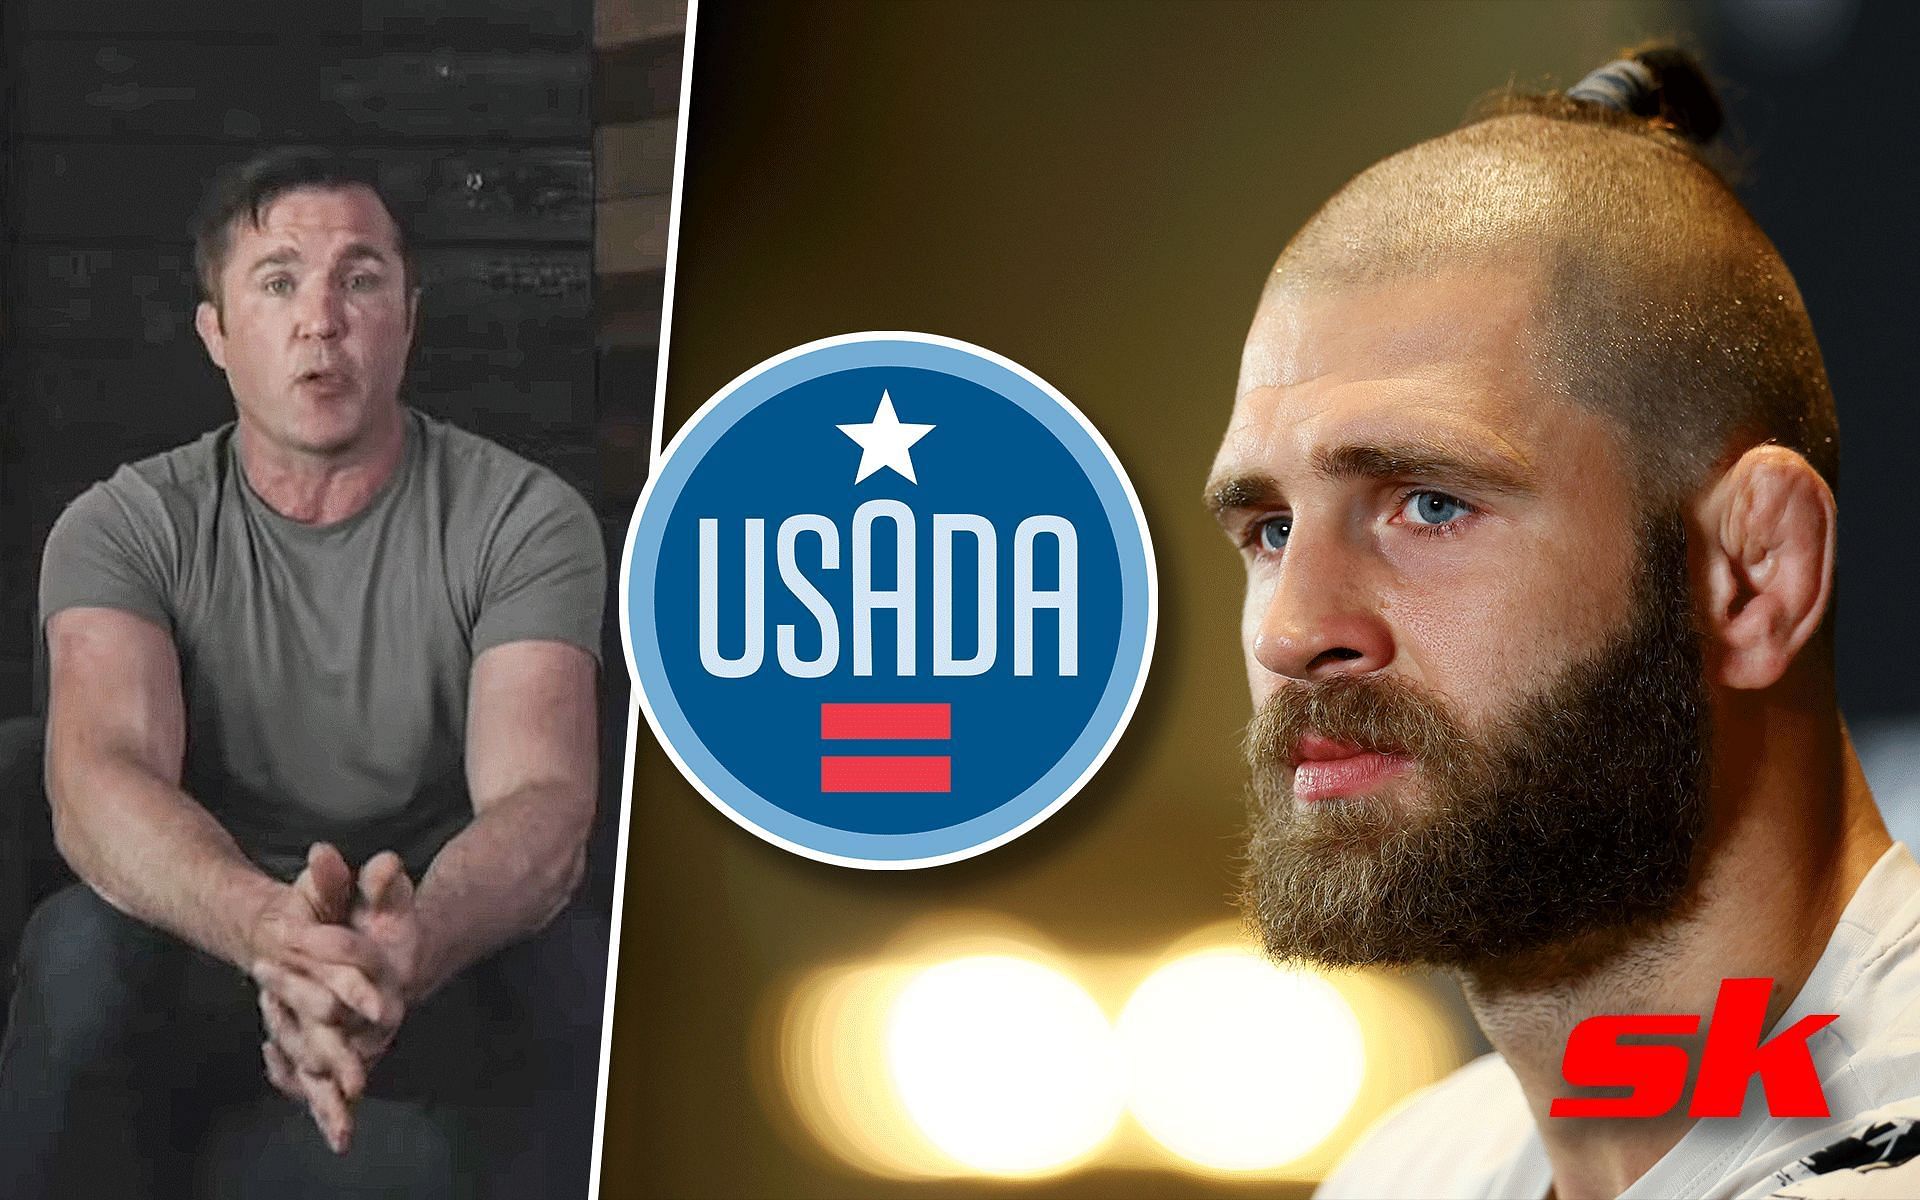 Chael Sonnen calls for changes in &quot;10.4 million dollar&quot; USADA budget [Images via: MMAFightingonSBN | YouTube, @usantidoping on Instagram]